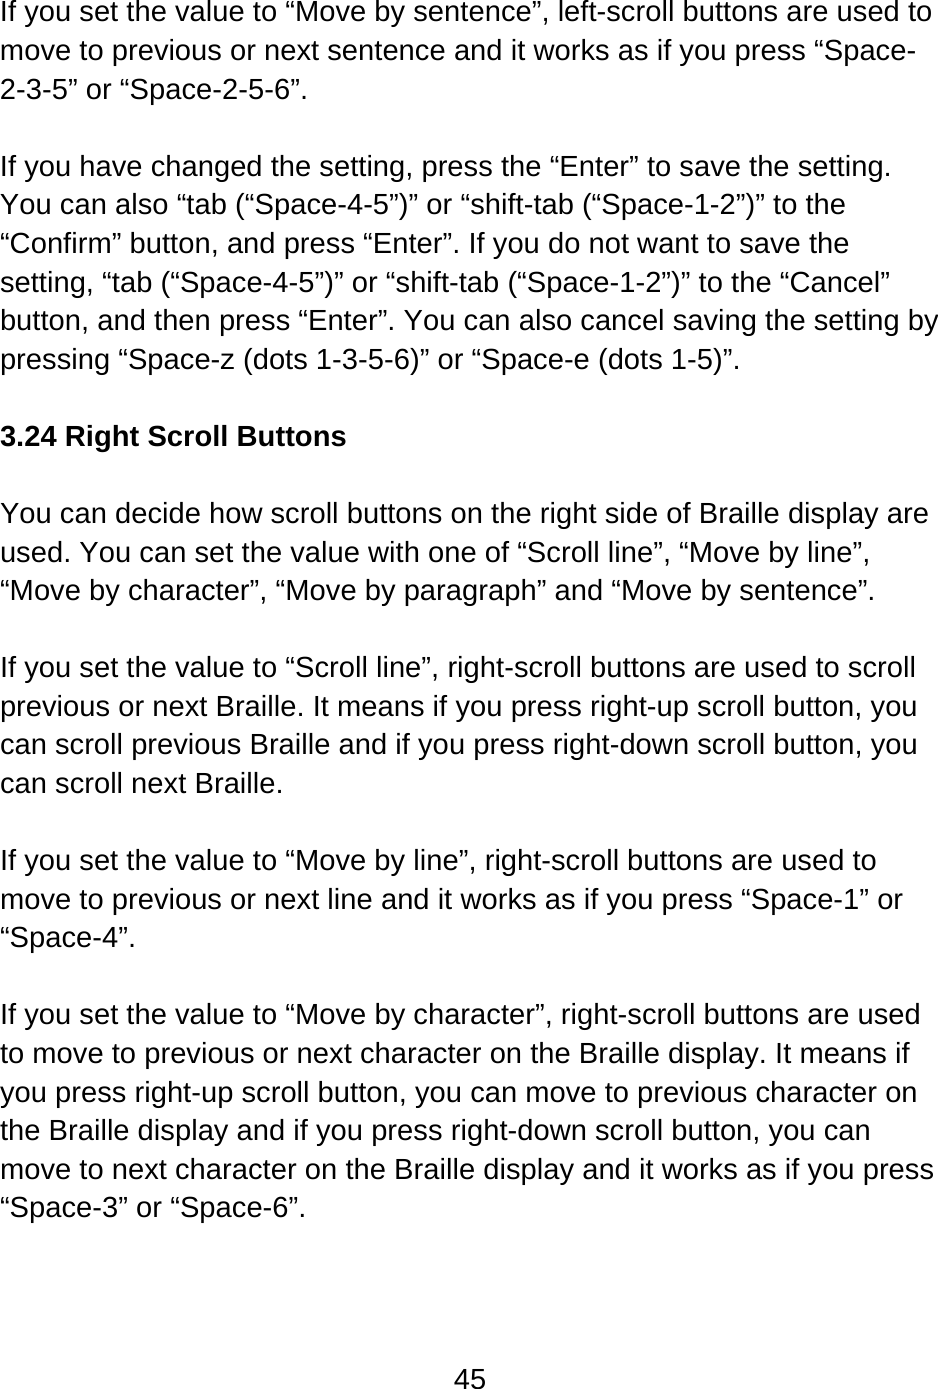 45   If you set the value to “Move by sentence”, left-scroll buttons are used to move to previous or next sentence and it works as if you press “Space-2-3-5” or “Space-2-5-6”.  If you have changed the setting, press the “Enter” to save the setting.   You can also “tab (“Space-4-5”)” or “shift-tab (“Space-1-2”)” to the “Confirm” button, and press “Enter”. If you do not want to save the setting, “tab (“Space-4-5”)” or “shift-tab (“Space-1-2”)” to the “Cancel” button, and then press “Enter”. You can also cancel saving the setting by pressing “Space-z (dots 1-3-5-6)” or “Space-e (dots 1-5)”.  3.24 Right Scroll Buttons  You can decide how scroll buttons on the right side of Braille display are used. You can set the value with one of “Scroll line”, “Move by line”, “Move by character”, “Move by paragraph” and “Move by sentence”.  If you set the value to “Scroll line”, right-scroll buttons are used to scroll previous or next Braille. It means if you press right-up scroll button, you can scroll previous Braille and if you press right-down scroll button, you can scroll next Braille.  If you set the value to “Move by line”, right-scroll buttons are used to move to previous or next line and it works as if you press “Space-1” or “Space-4”.   If you set the value to “Move by character”, right-scroll buttons are used to move to previous or next character on the Braille display. It means if you press right-up scroll button, you can move to previous character on the Braille display and if you press right-down scroll button, you can move to next character on the Braille display and it works as if you press “Space-3” or “Space-6”.  